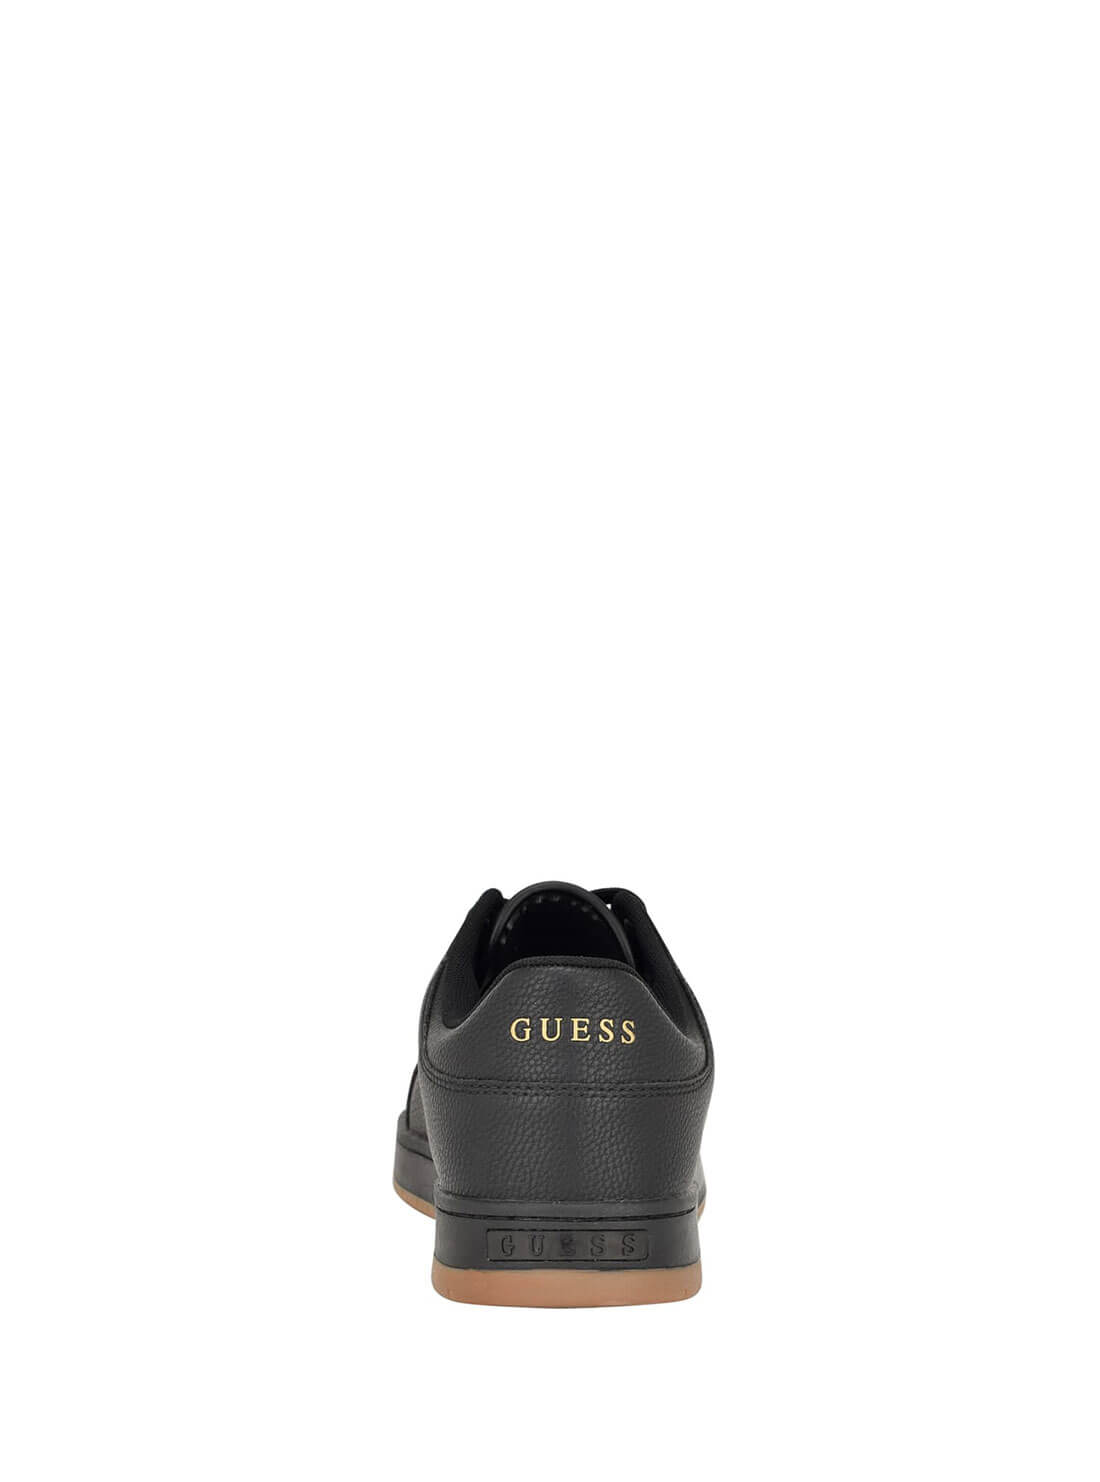 Black Tempo Sneakers | GUESS men's shoes | back view